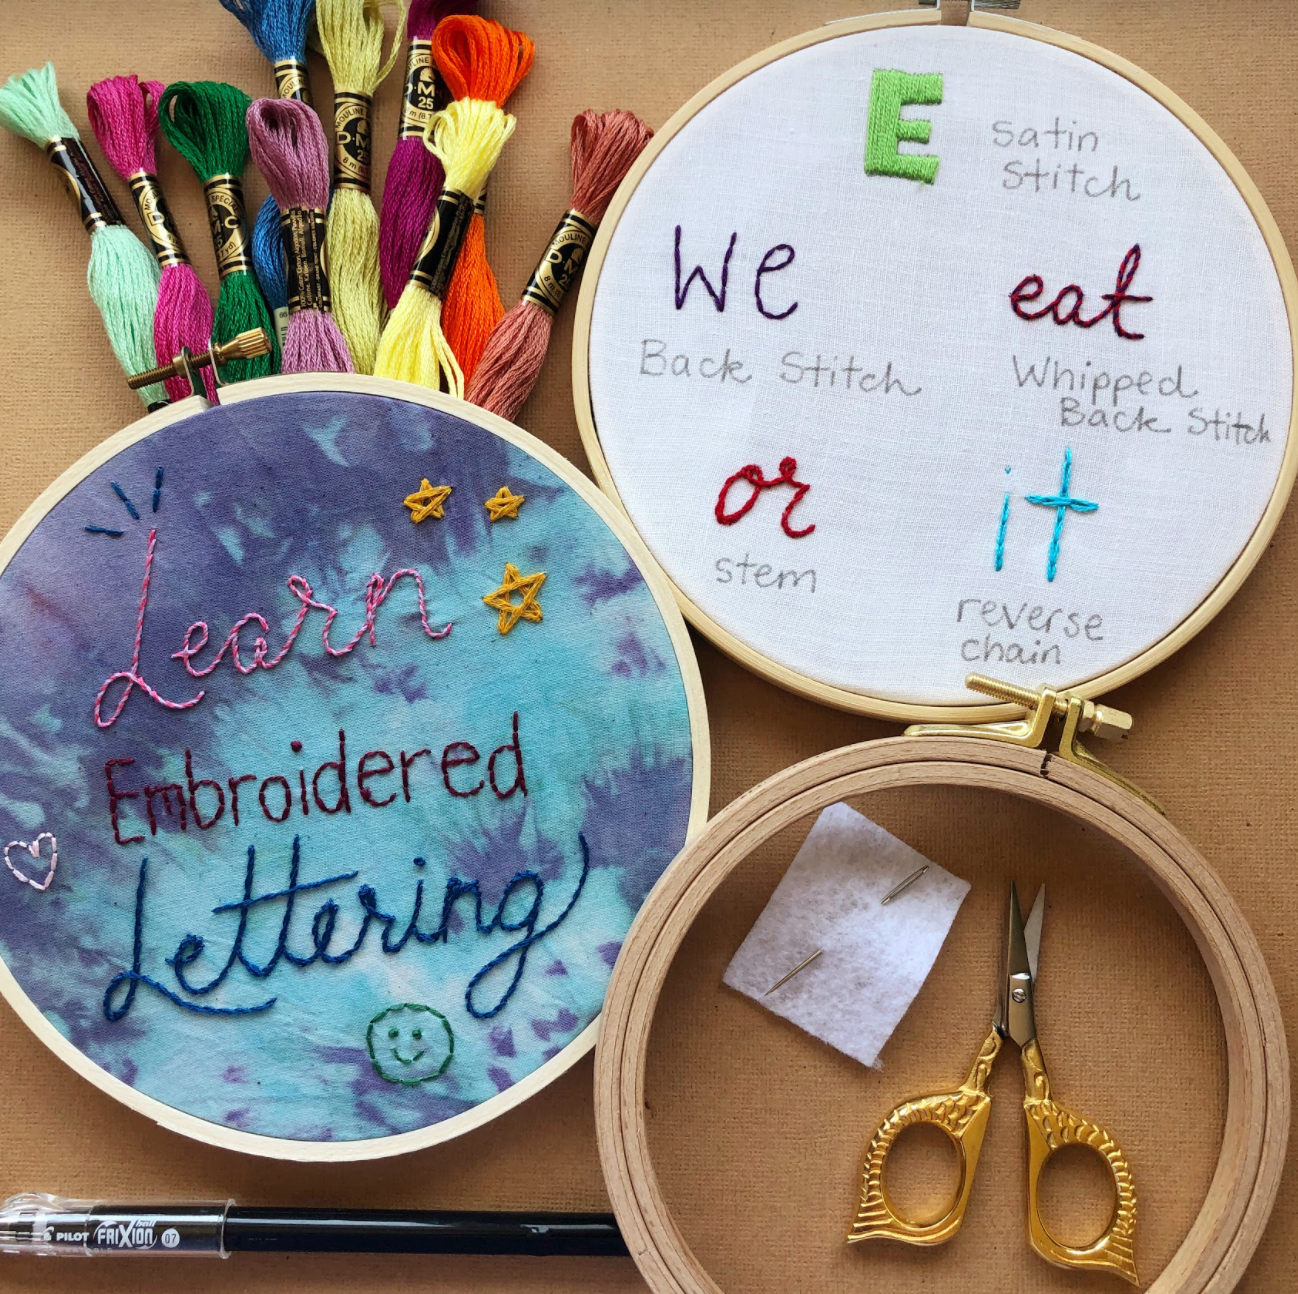 EMBROIDERY CLASS: Embroidered Lettering - Word of the Year